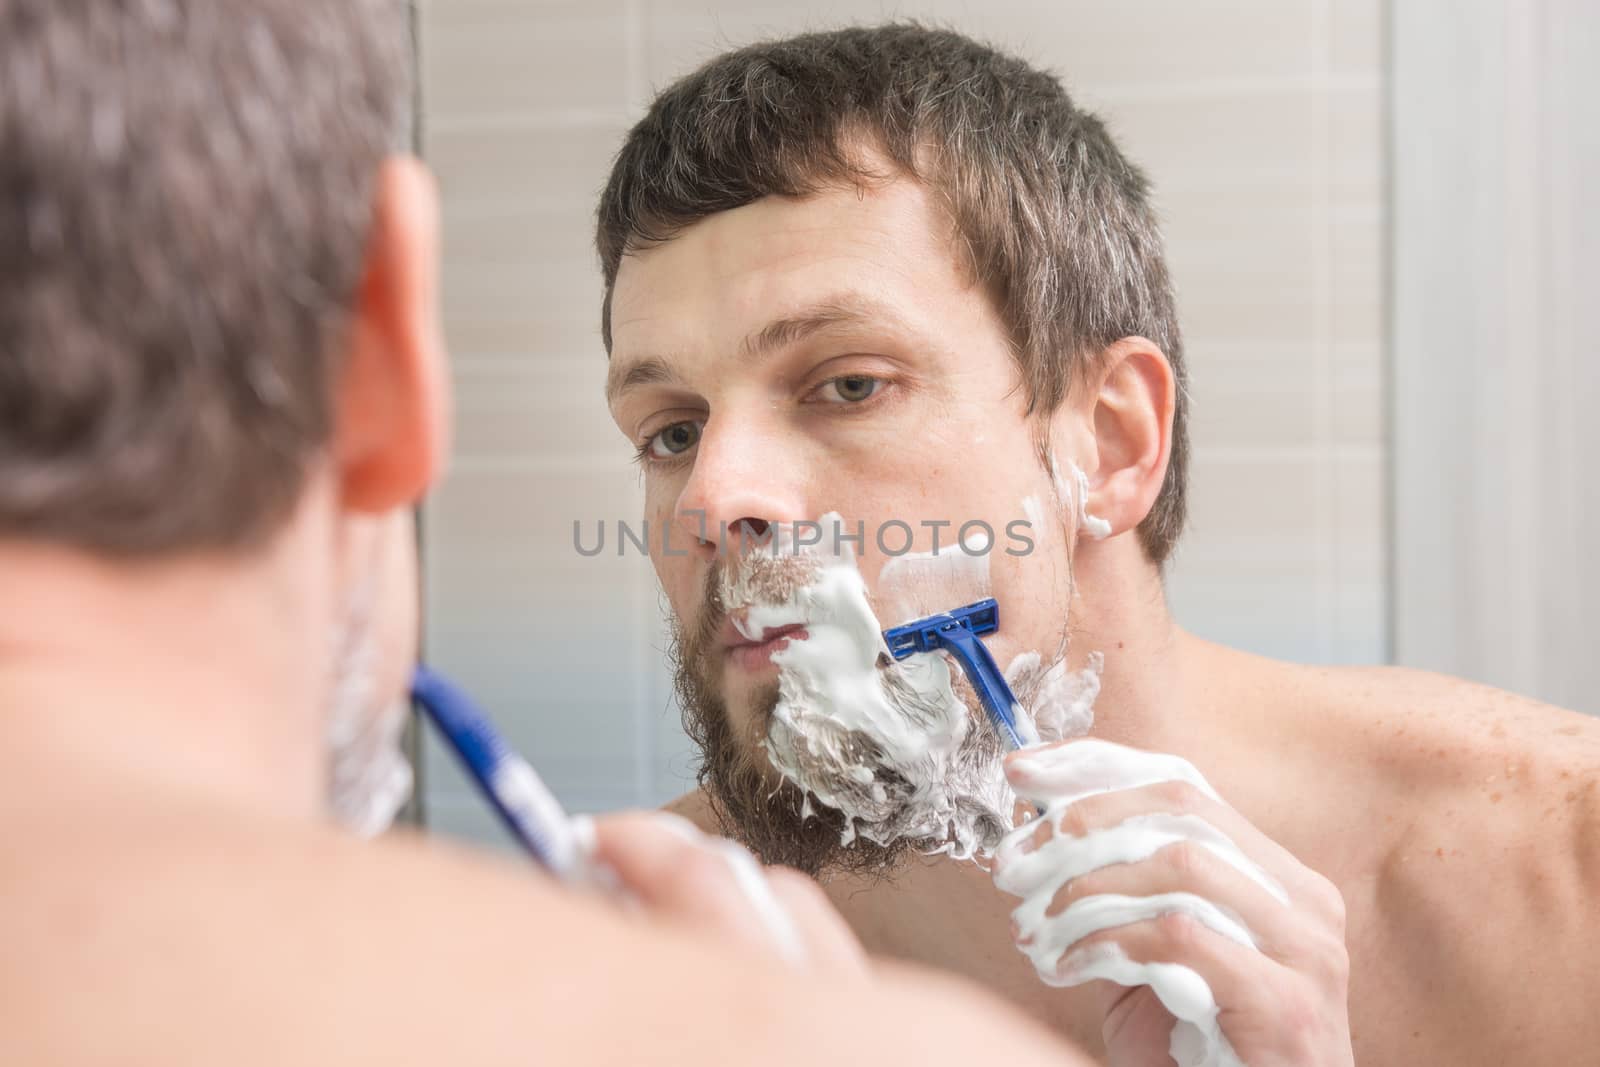 The man decided to change the image and completely shaves